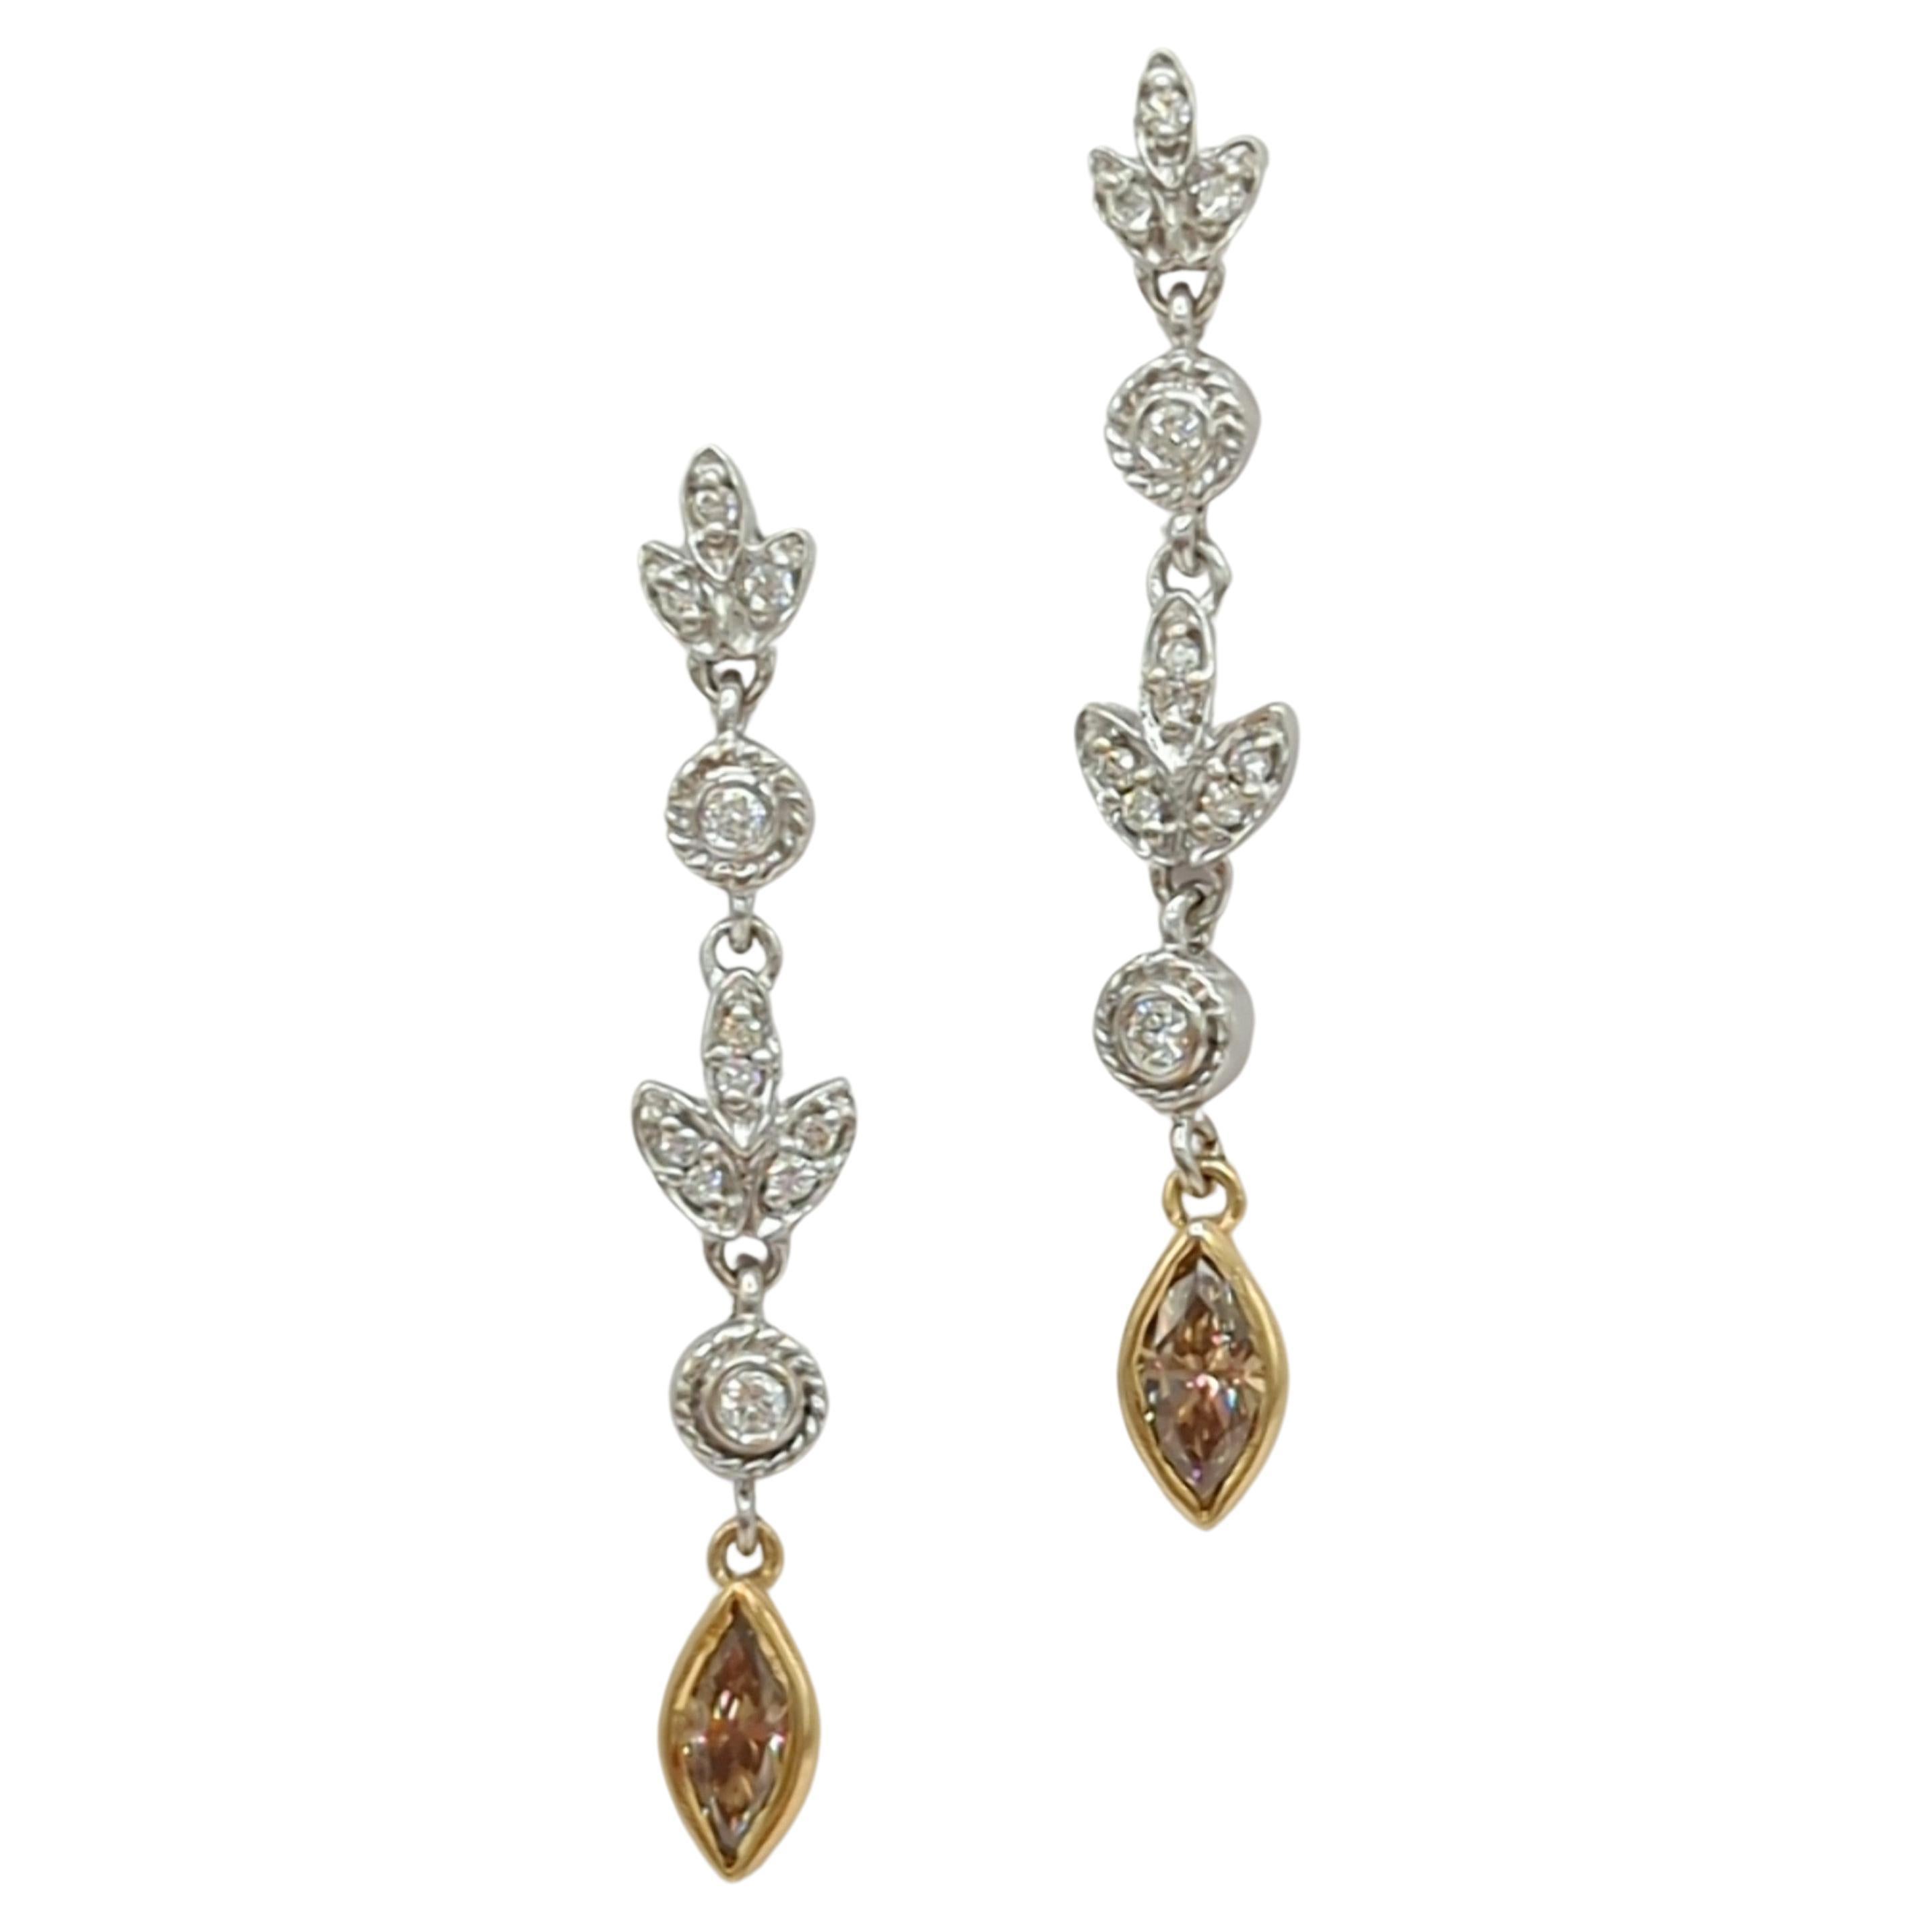 Champagne and White Diamond Dangle Earrings in 18K 2 Tone Gold